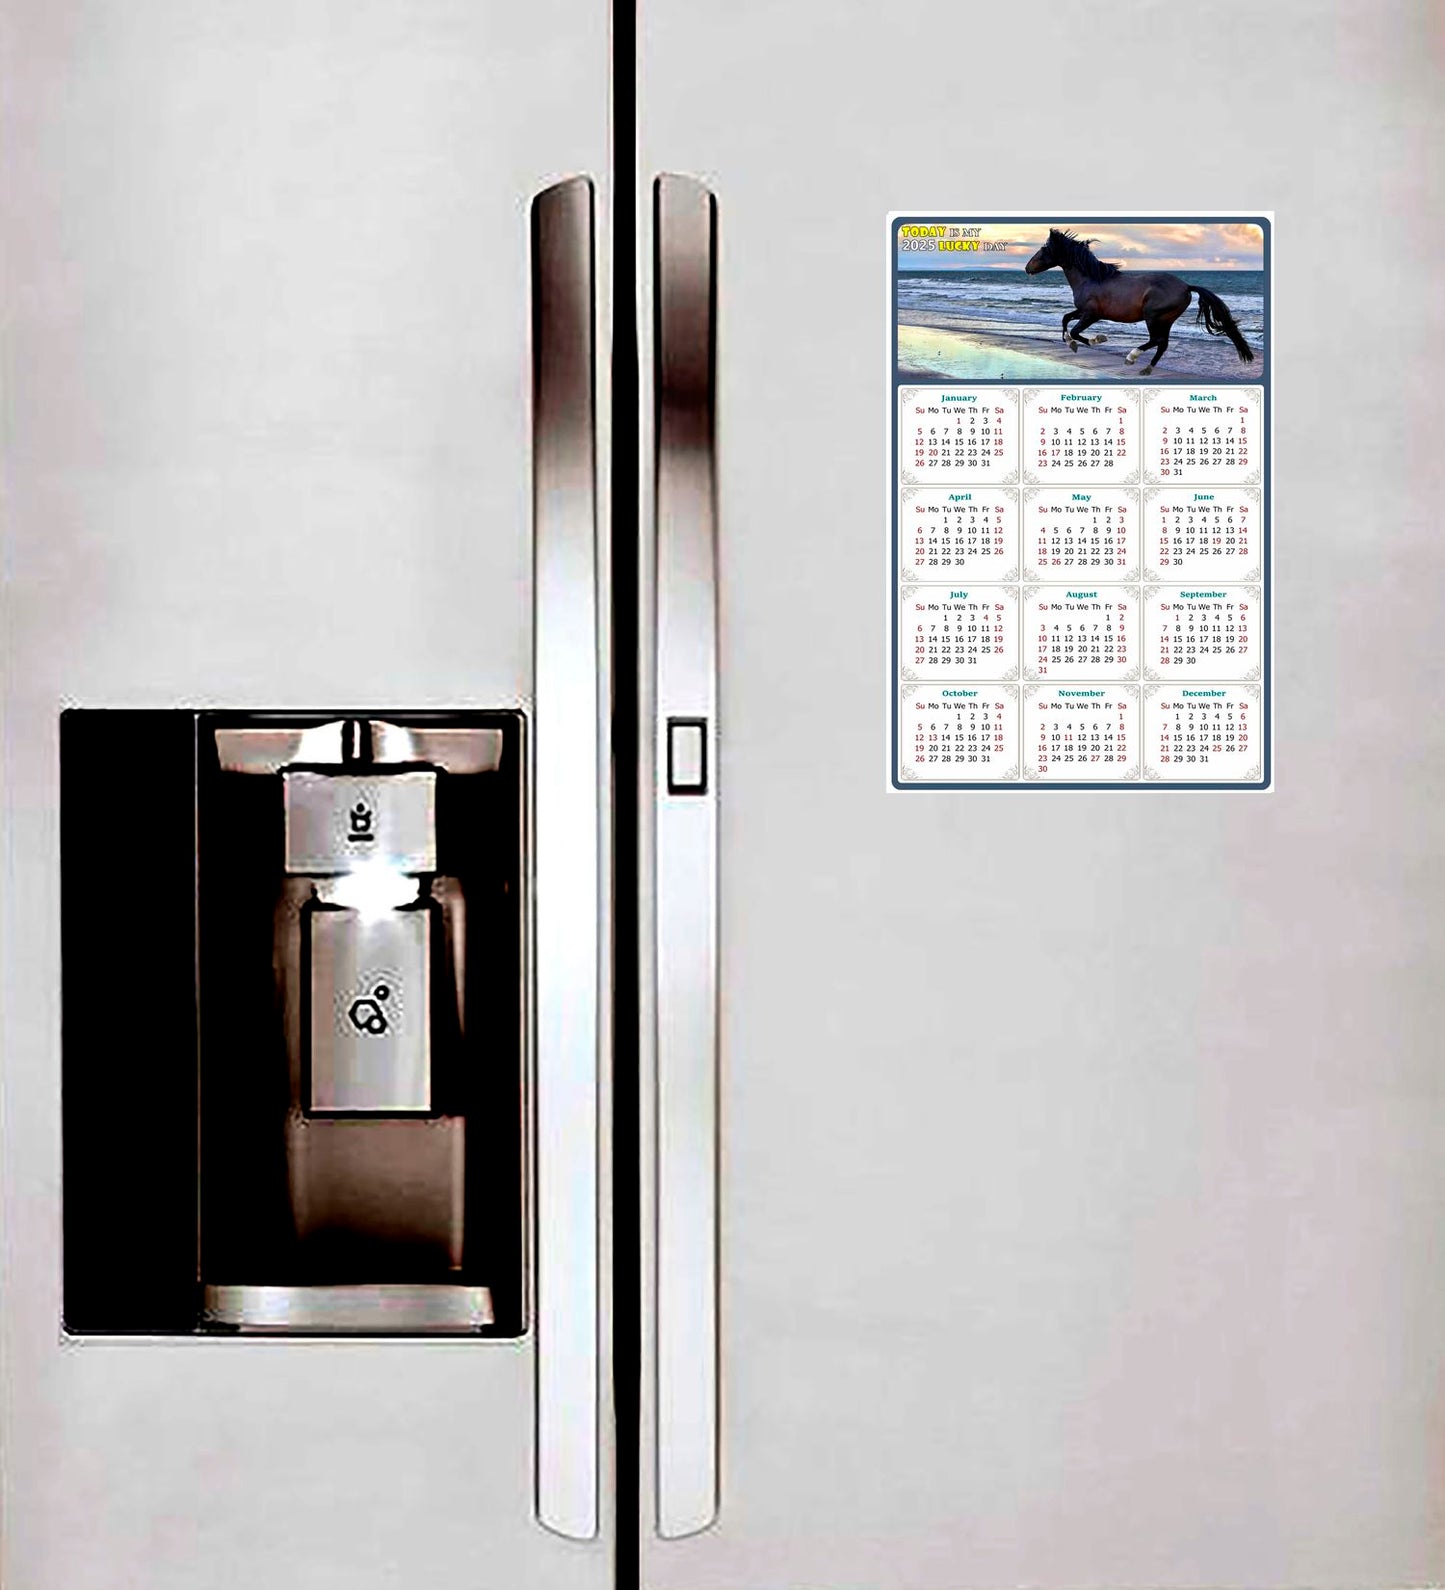 2025 Magnetic Calendar - Calendar Magnets - Today is my Lucky Day - (Fade, Tear, and Water Resistant) - Horses Themed 015